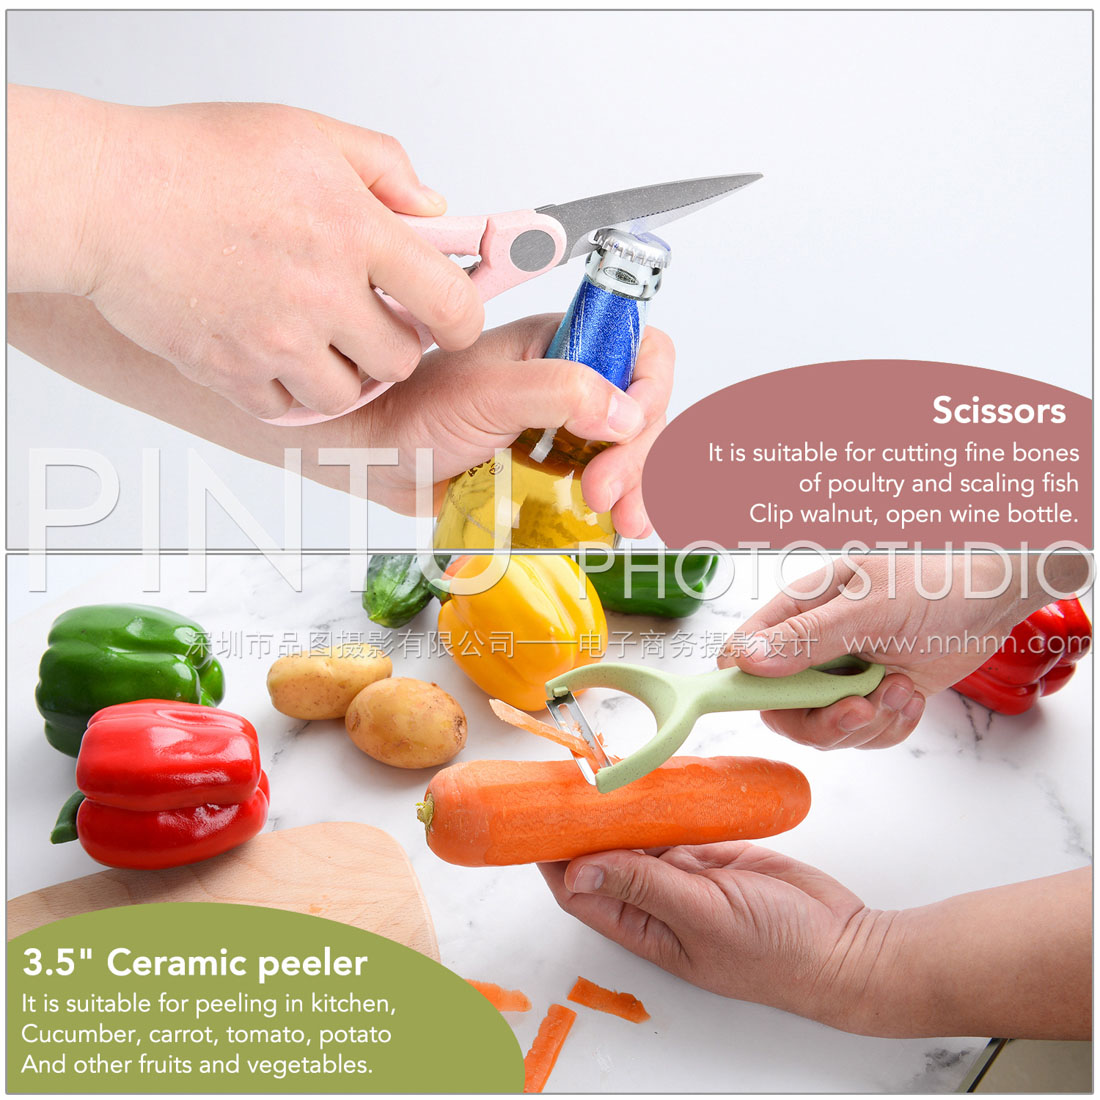 The best Amazon product photography in China Lifestyle kitchen knife open beer / peel